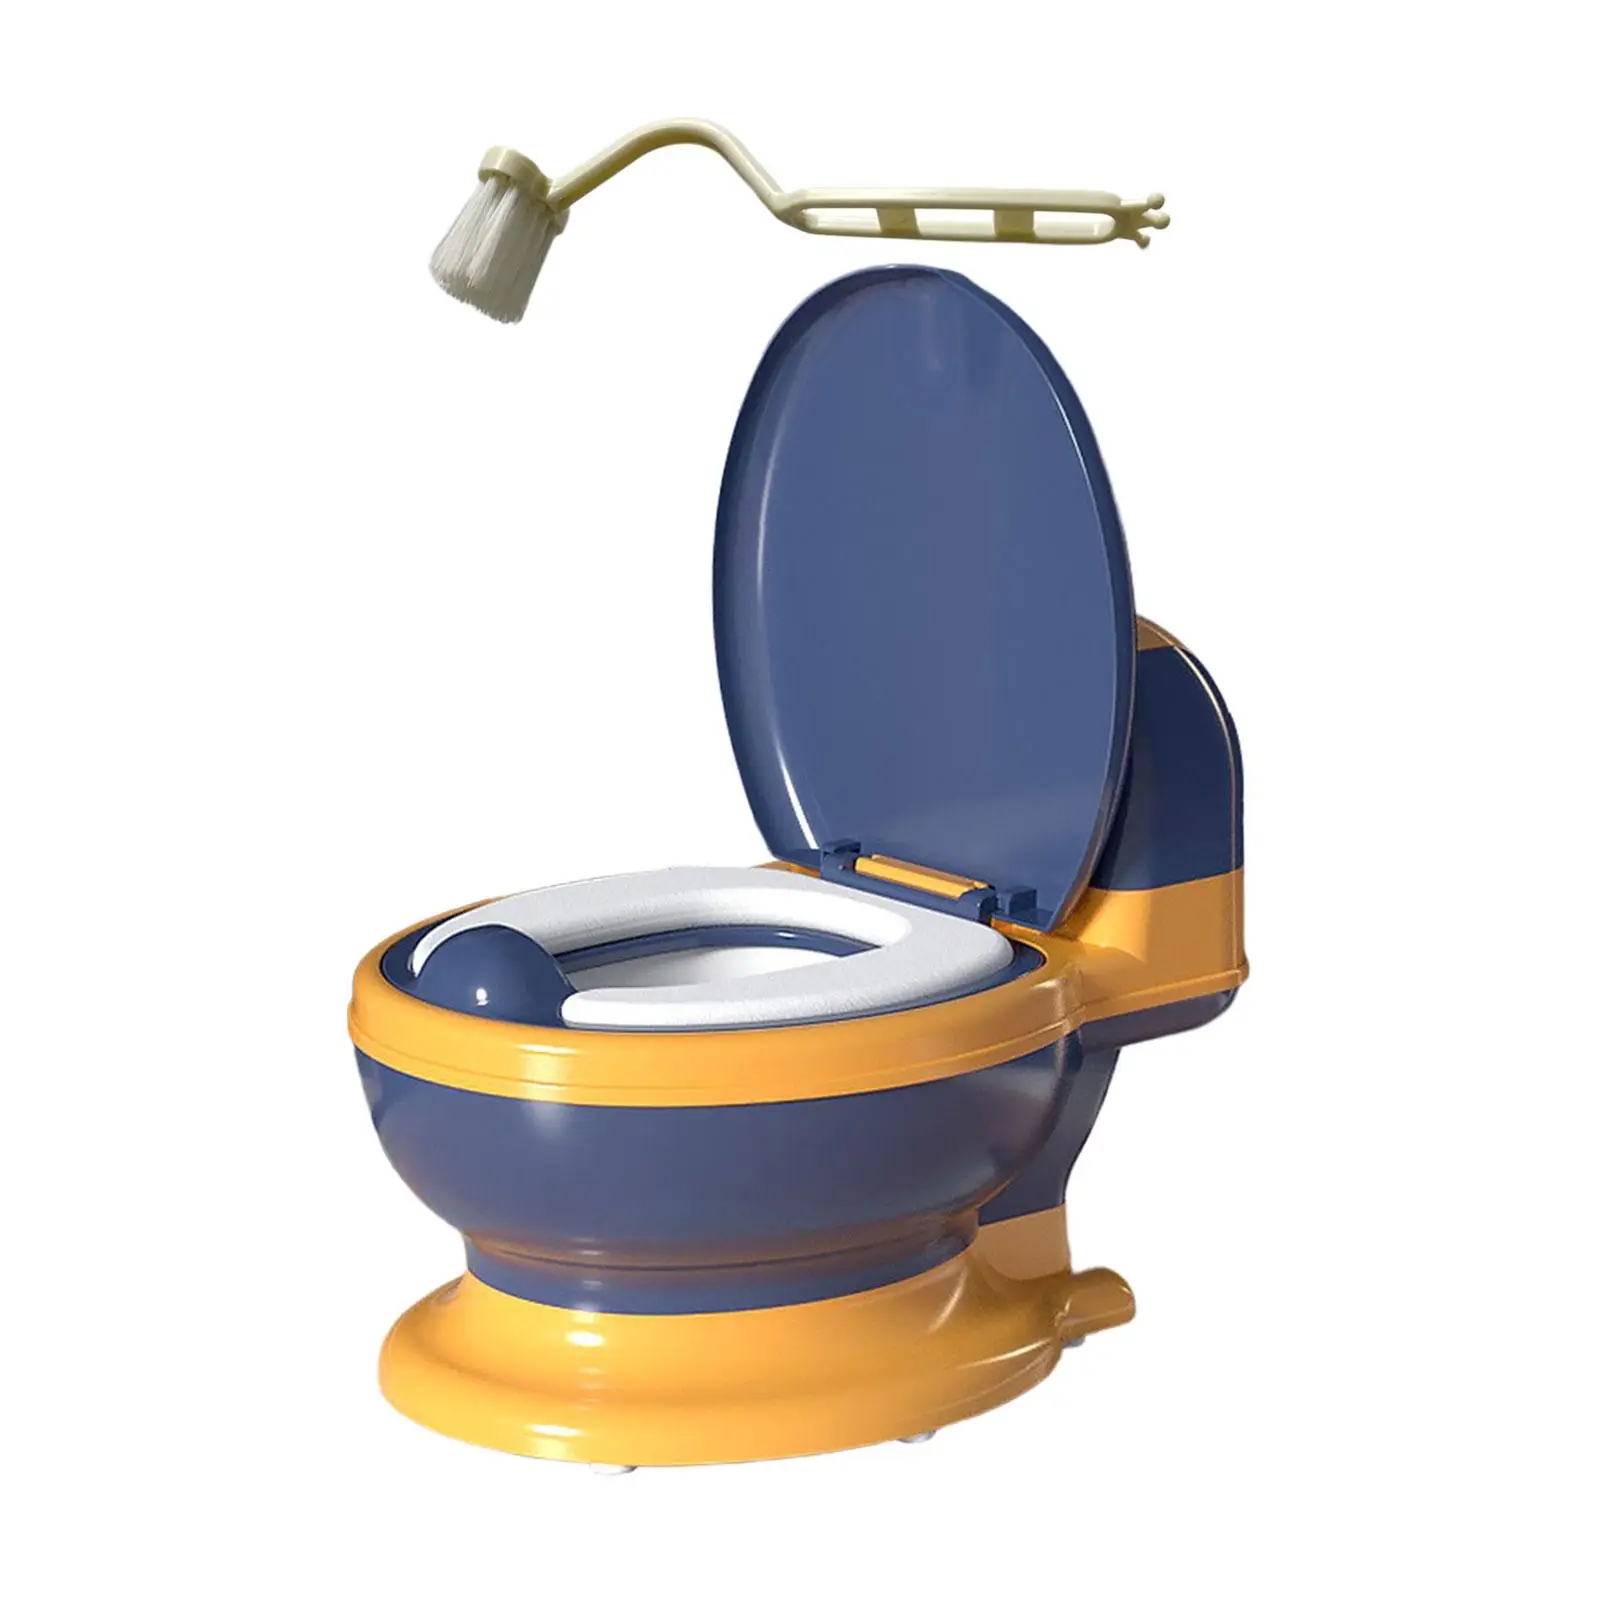 Toilet Training Potty with Wipe Storage Easy to Clean Includes Cleaning Brush Training Transition Potty Seat Realistic Toilet